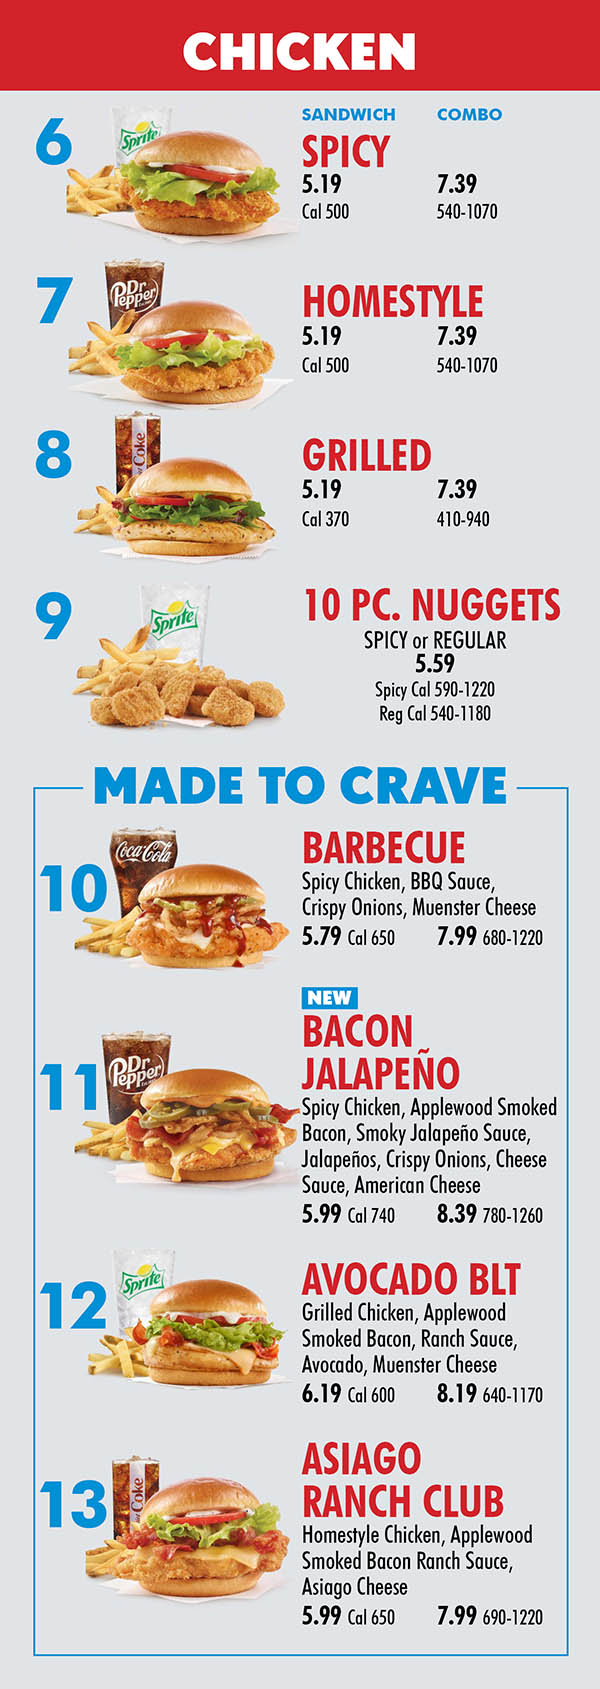 Wendy's S 84th St Lincoln NE Menu Page 2
CHICKEN
6
MADE TO CRAVE
10
11
12
7
8
SANDWICH COMBO
SPICY
5.19 7.39
Cal 500 540-1070
HOMESTYLE
5.19 7.39
Cal 500 540-1070
GRILLED
5.19 7.39
Cal 370 410-940
10 PC. NUGGETS
SPICY or REGULAR
5.59
Spicy Cal 590-1220
Reg Cal 540-1180
BARBECUE
Spicy Chicken, BBQ Sauce,
Crispy Onions, Muenster Cheese
5.79 Cal 650 7.99 680-1220
BACON
JALAPEÑO
Spicy Chicken, Applewood Smoked Bacon, Smoky Jalapeño Sauce, Jalapeños, Crispy Onions, Cheese Sauce, American Cheese
5.99 Cal 740 8.39 780-1260
AVOCADO BLT
Grilled Chicken, Applewood
Smoked Bacon, Ranch Sauce,
Avocado, Muenster Cheese
6.19 Cal 600 8.19 640-1170
ASIAGO
RANCH CLUB
Homestyle Chicken, Applewood
Smoked Bacon Ranch Sauce,
Asiago Cheese
5.99 Cal 650 7.99 690-1220